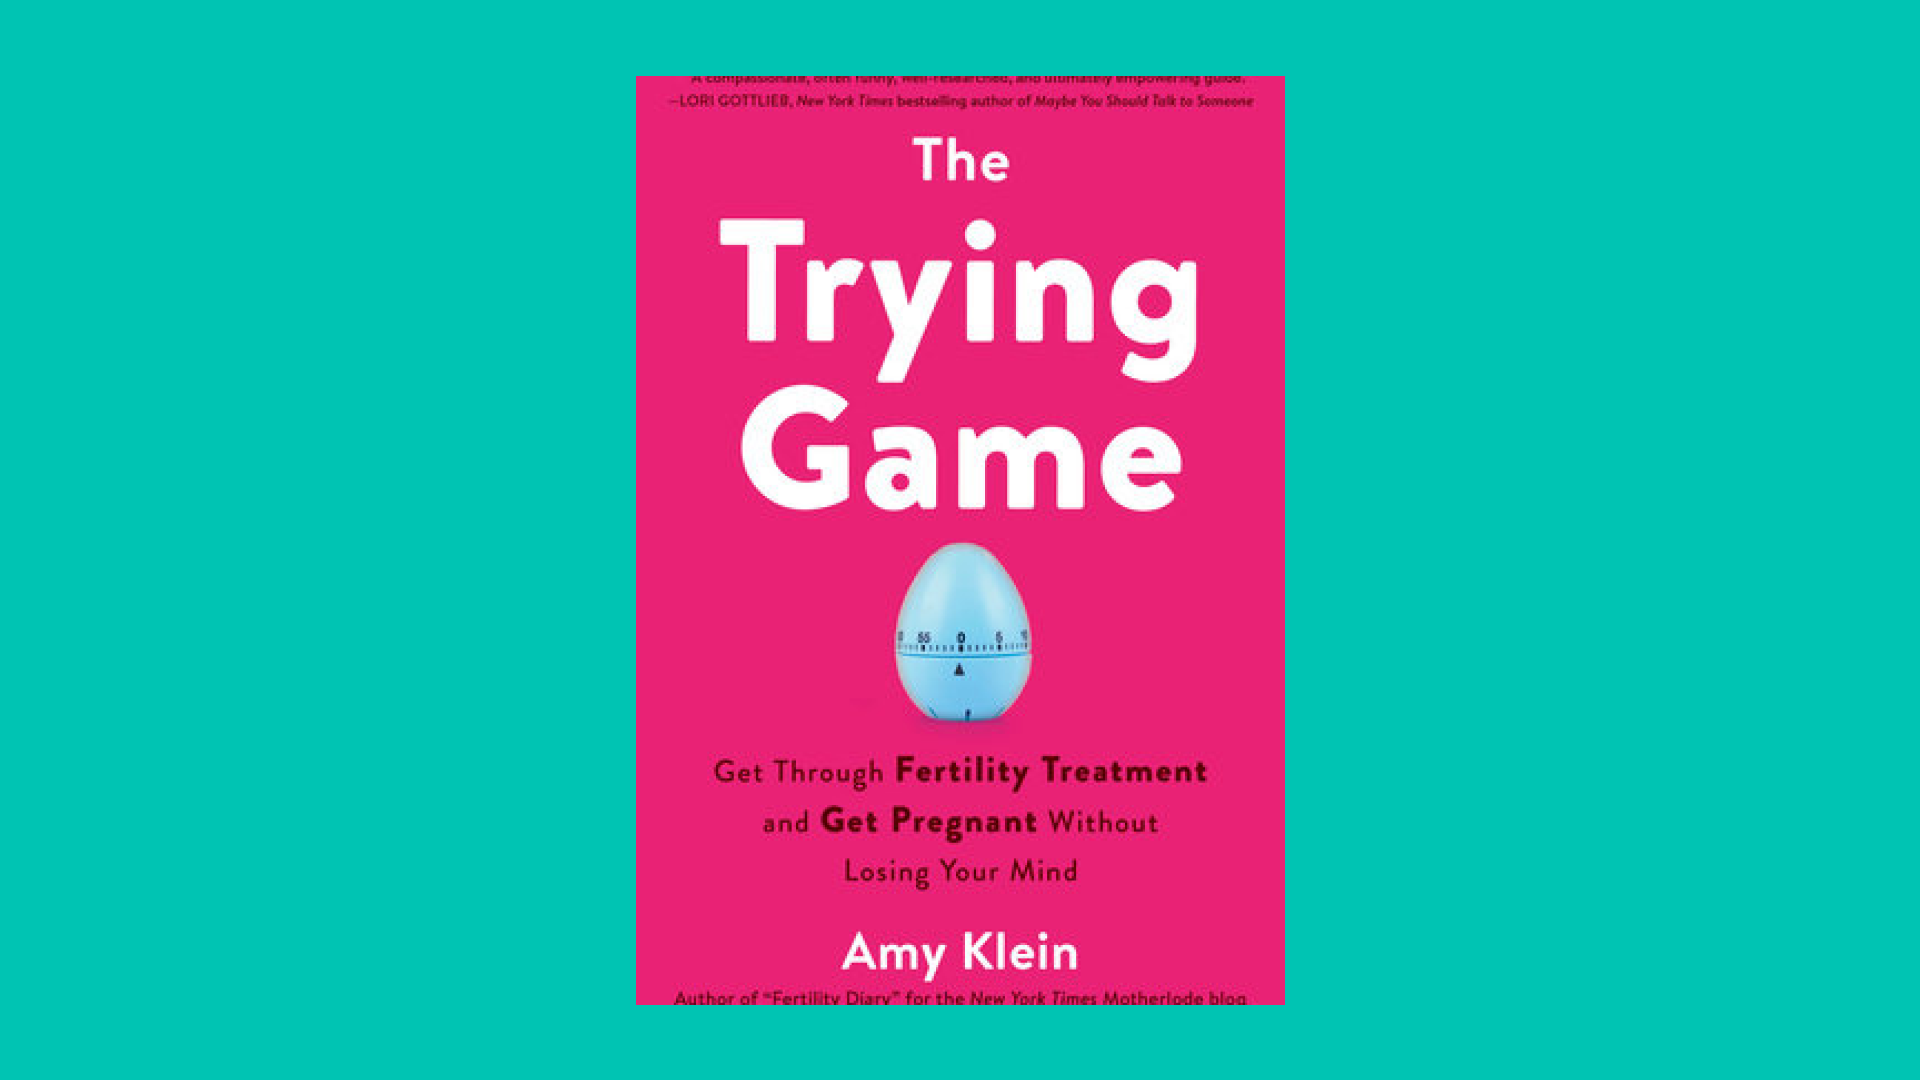 “The Trying Game” by Amy Klein